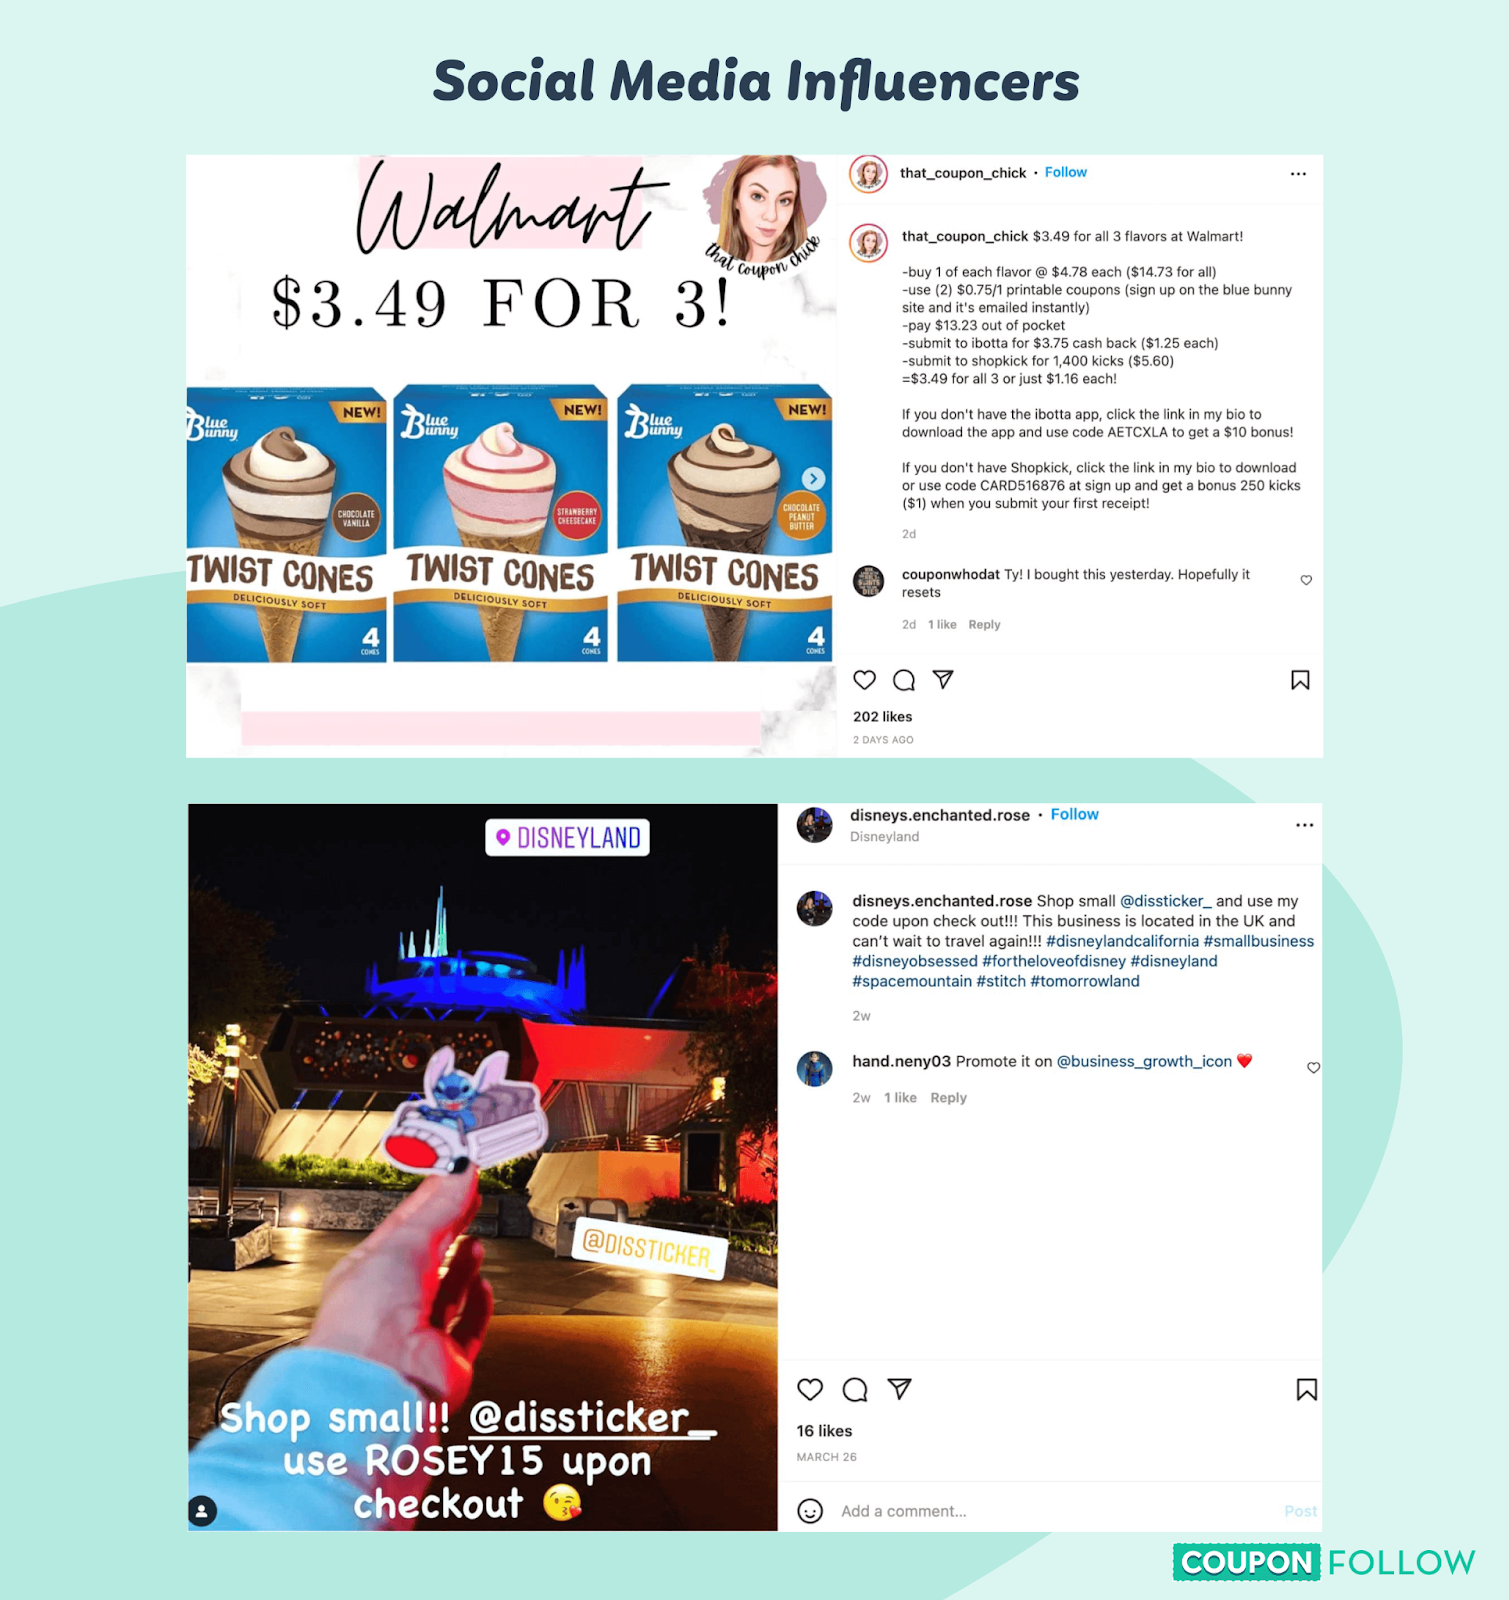  Social media influencers offering coupon codes